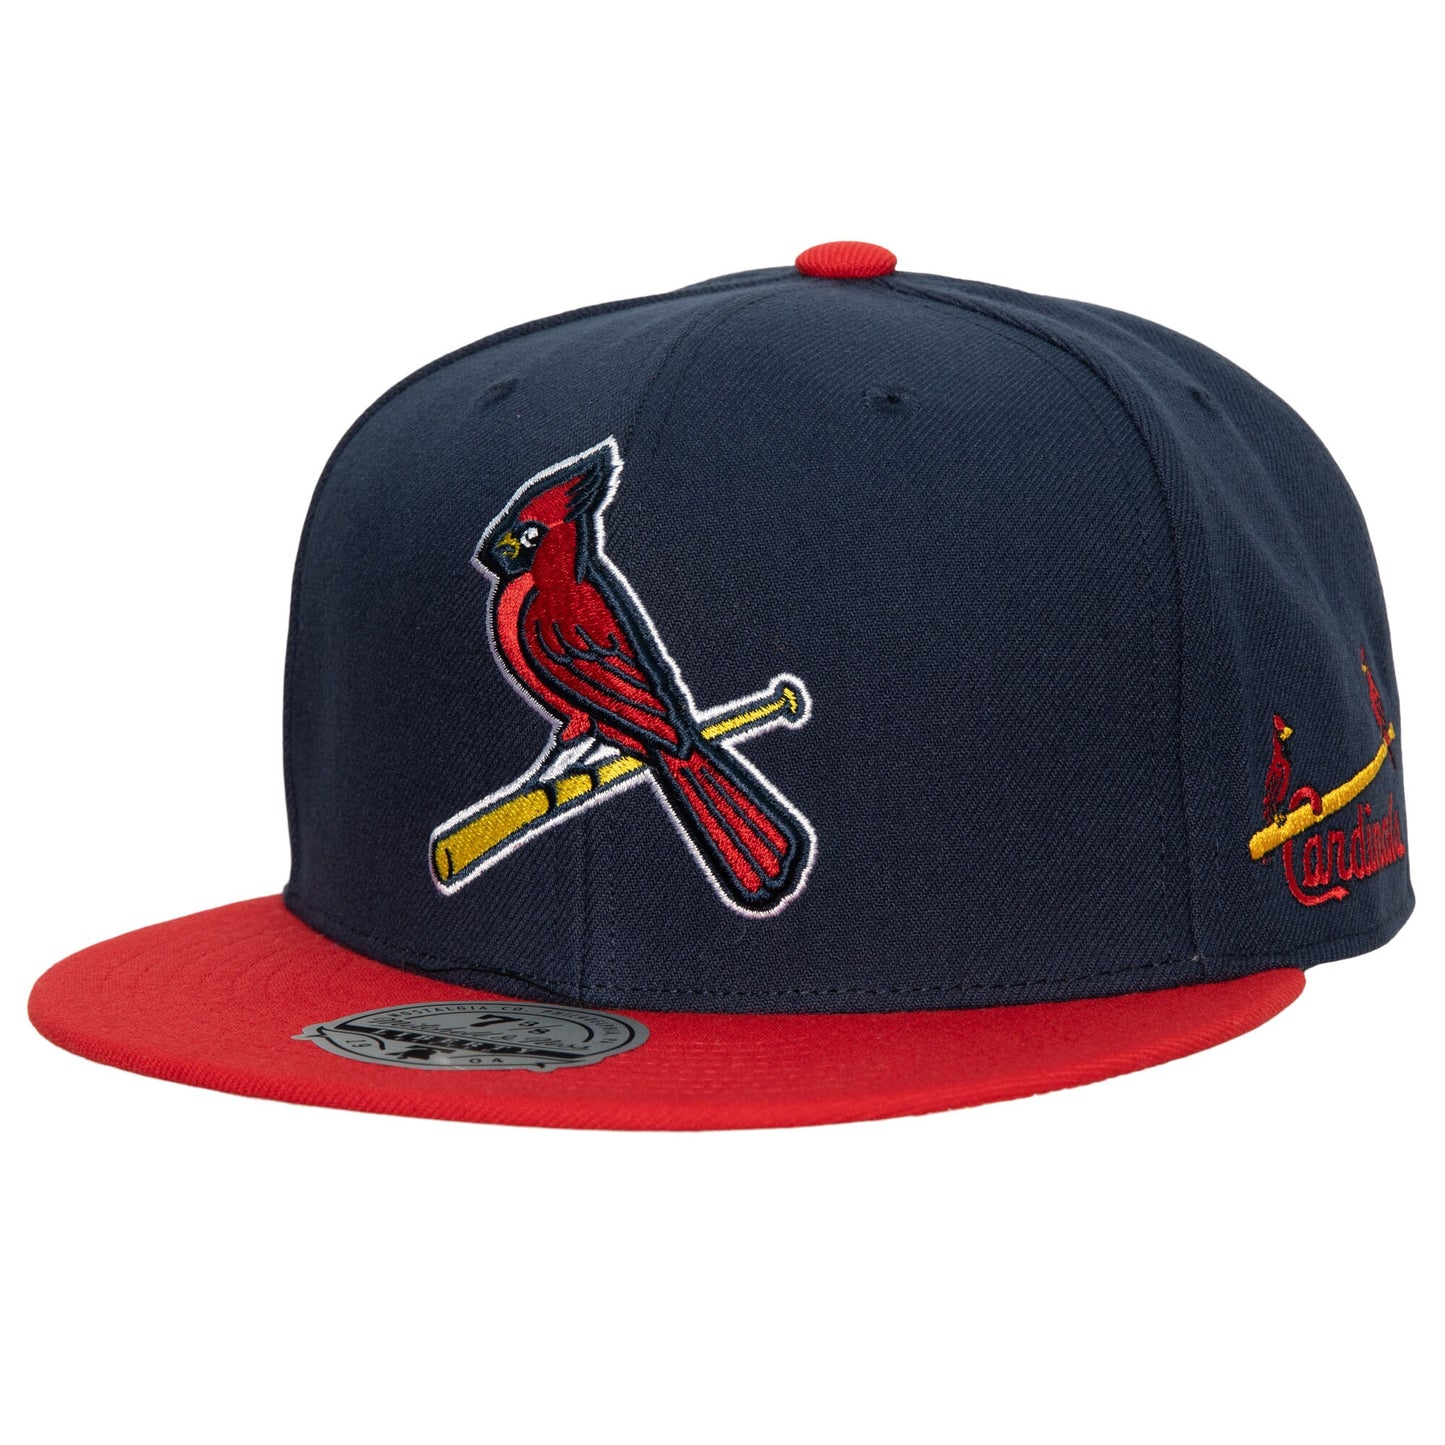 St. Louis Cardinals Mitchell & Ness Bases Loaded Fitted Hat - Navy/Red